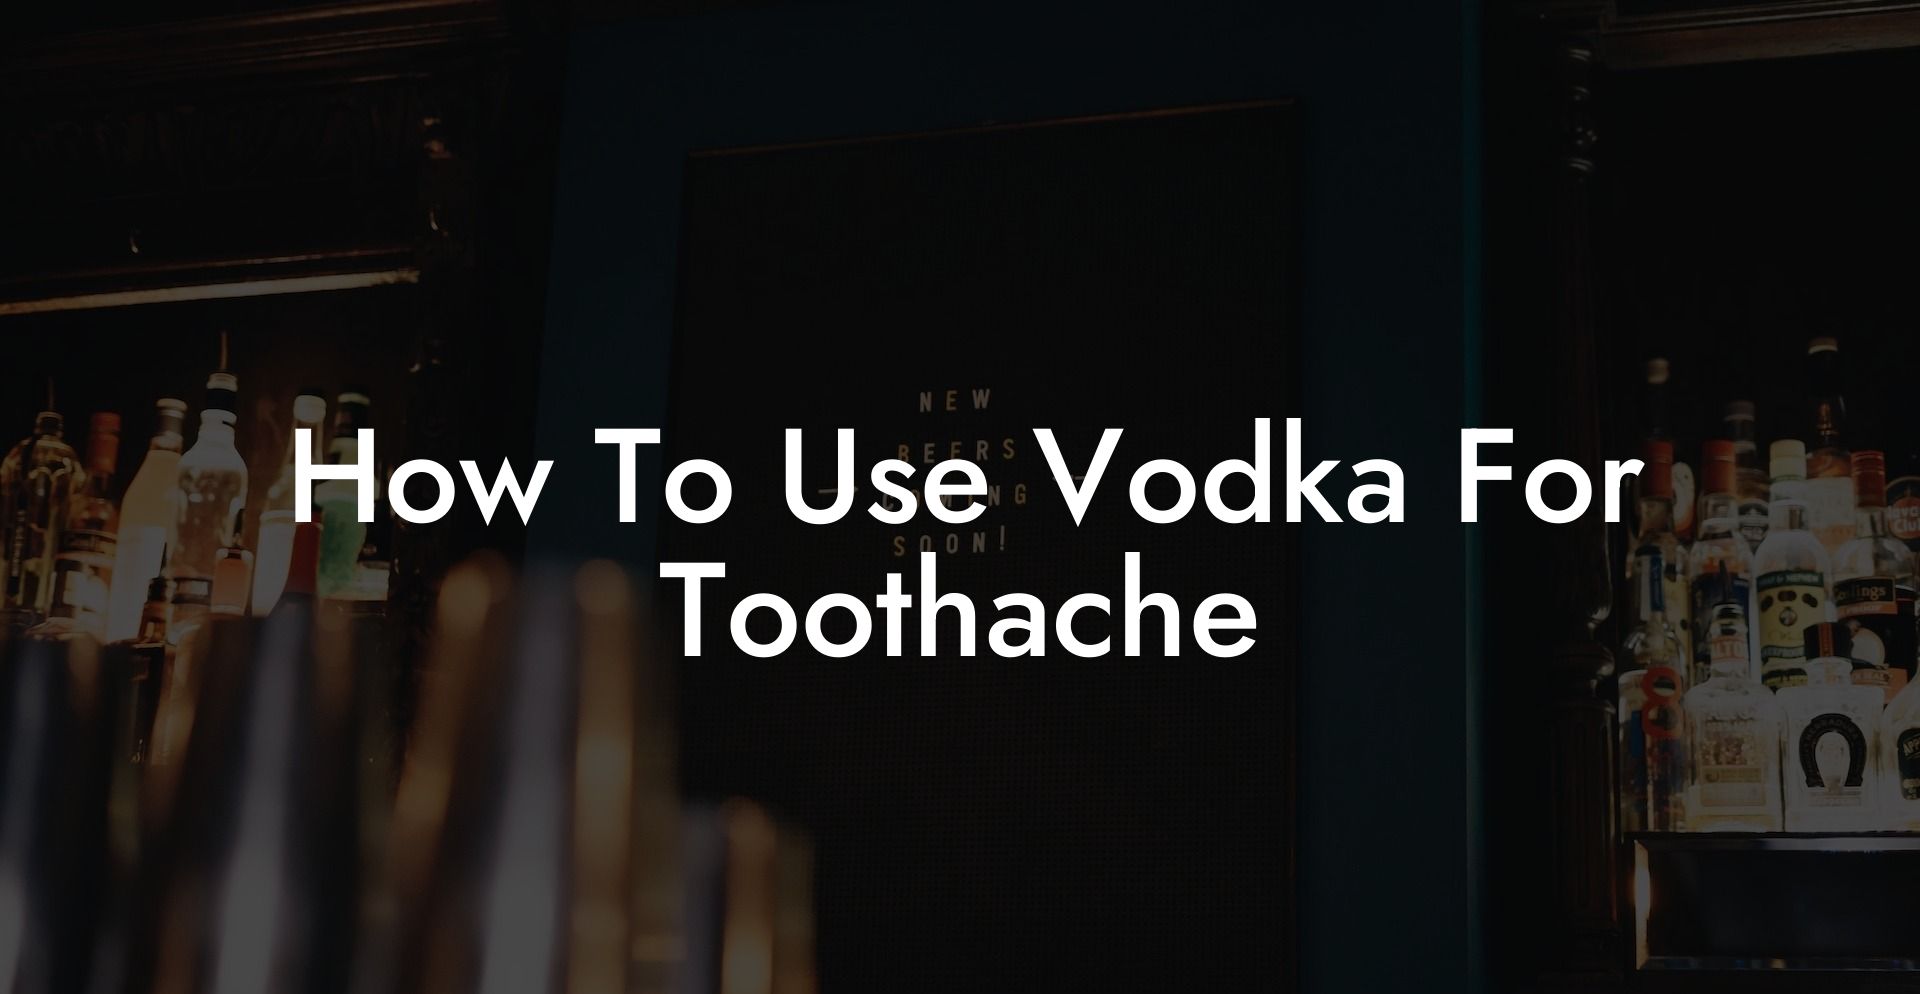 How To Use Vodka For Toothache